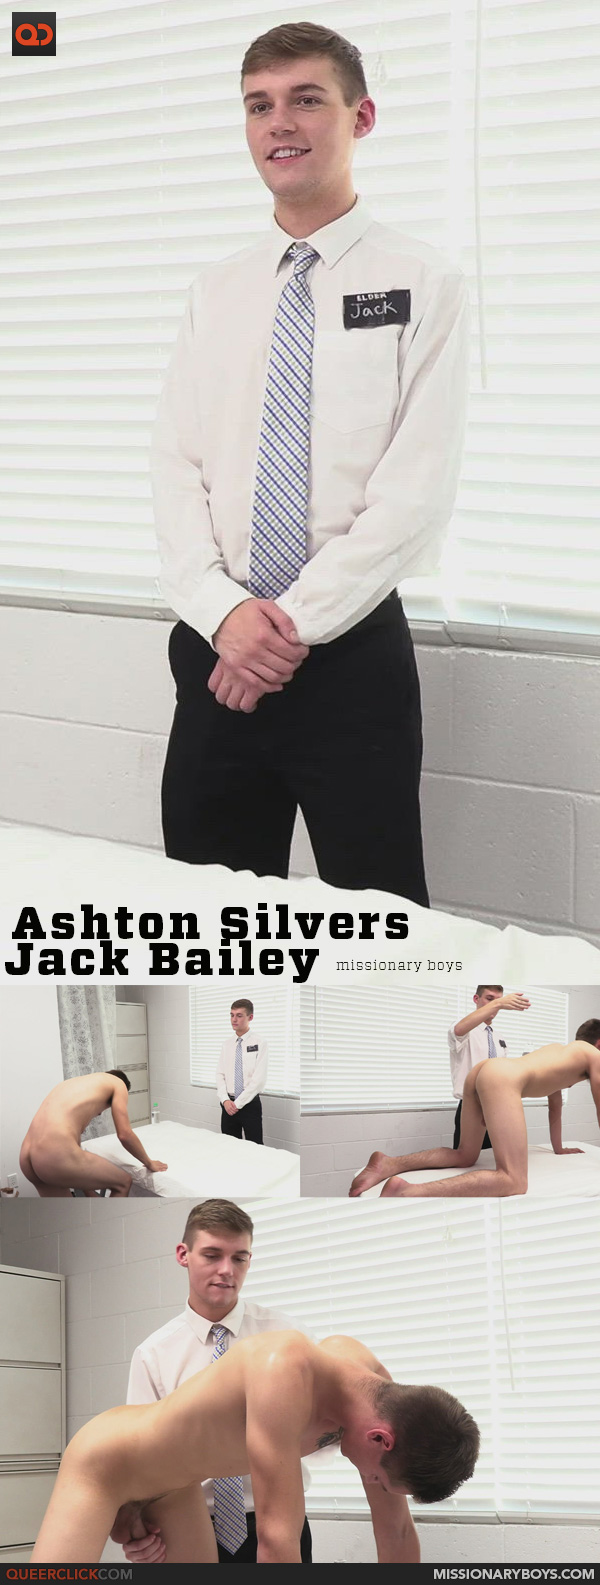 Say Uncle | Missionary Boys: Ashton Silvers and Jack Bailey